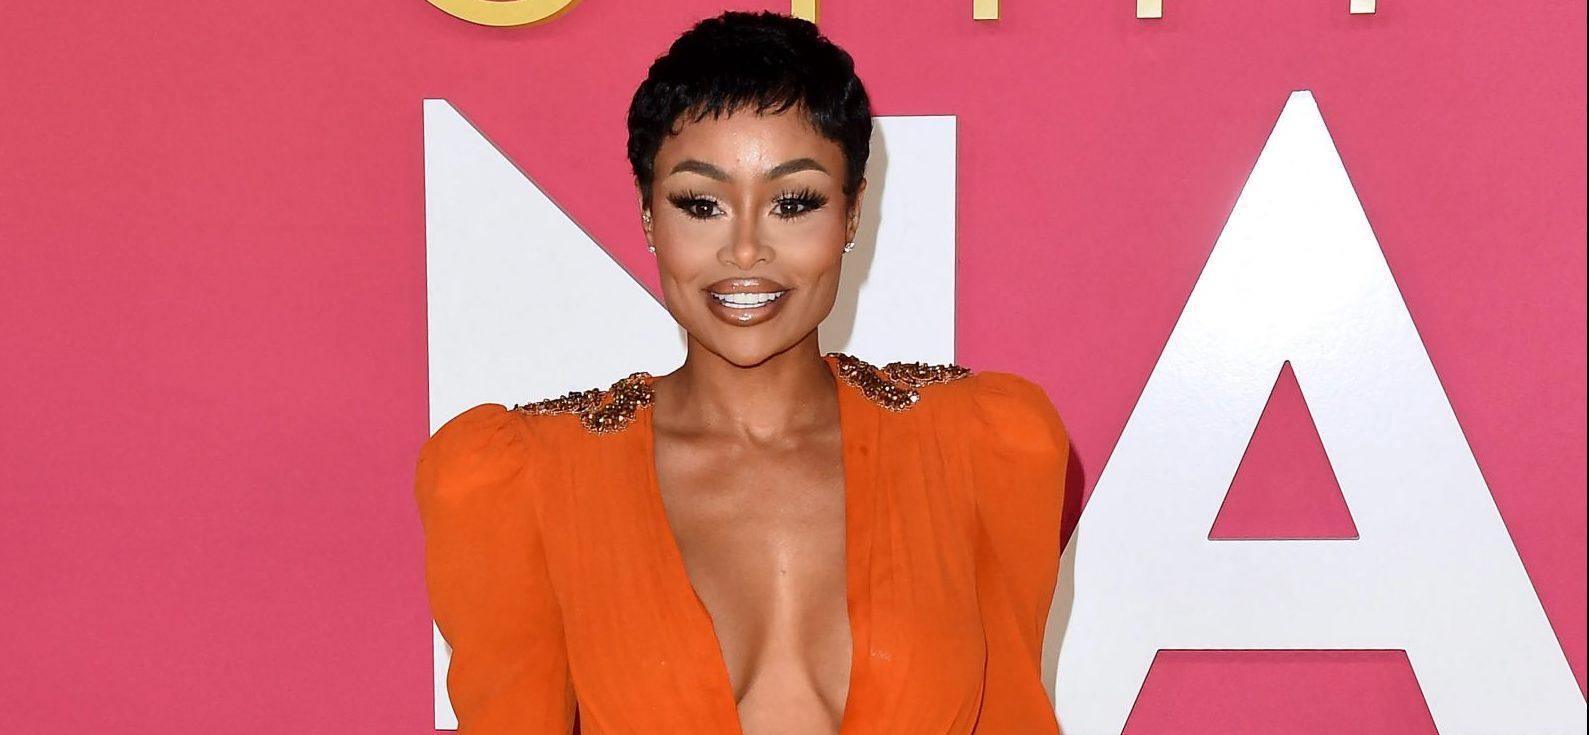 Blac Chyna Speaks On Being Celibate Amid Her ‘Healing Journey’ And Physical Transformation